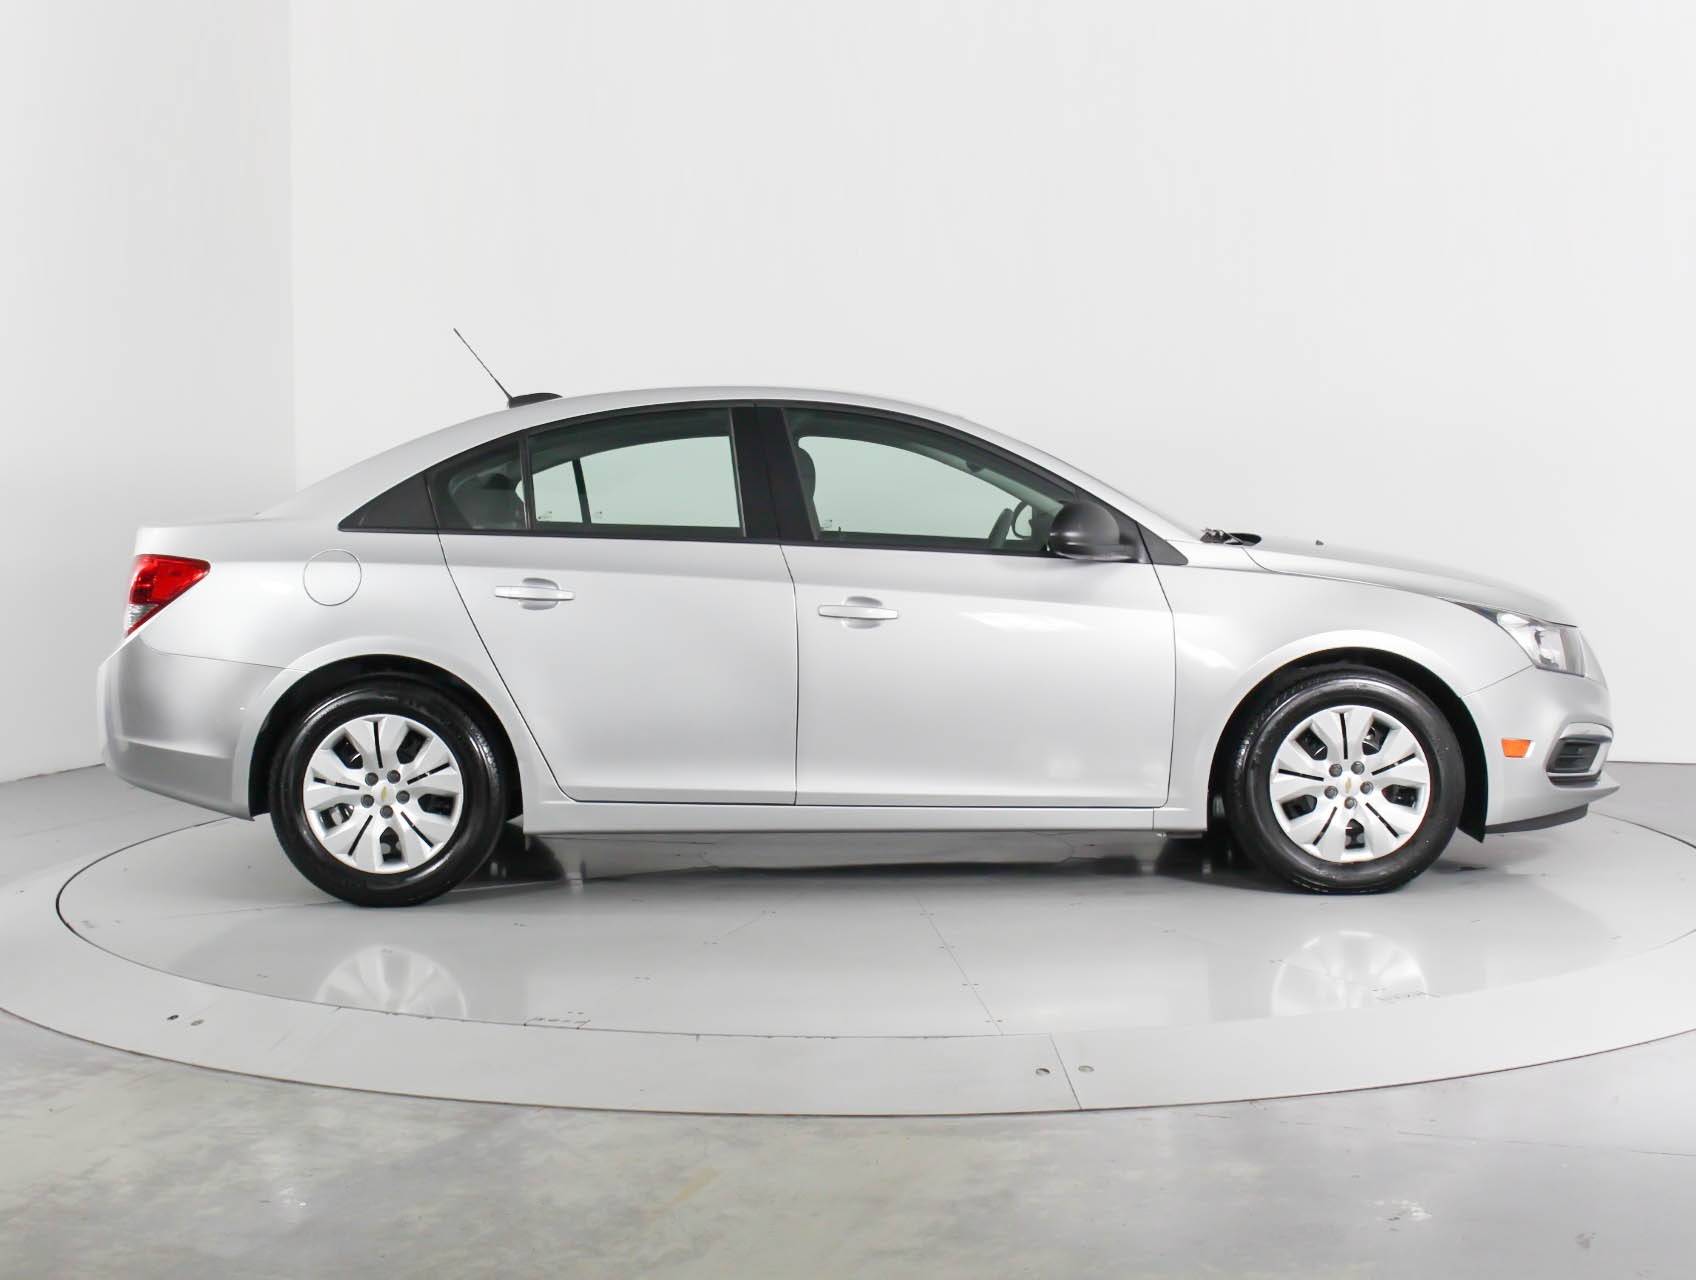 Florida Fine Cars - Used CHEVROLET CRUZE 2015 WEST PALM 1LS